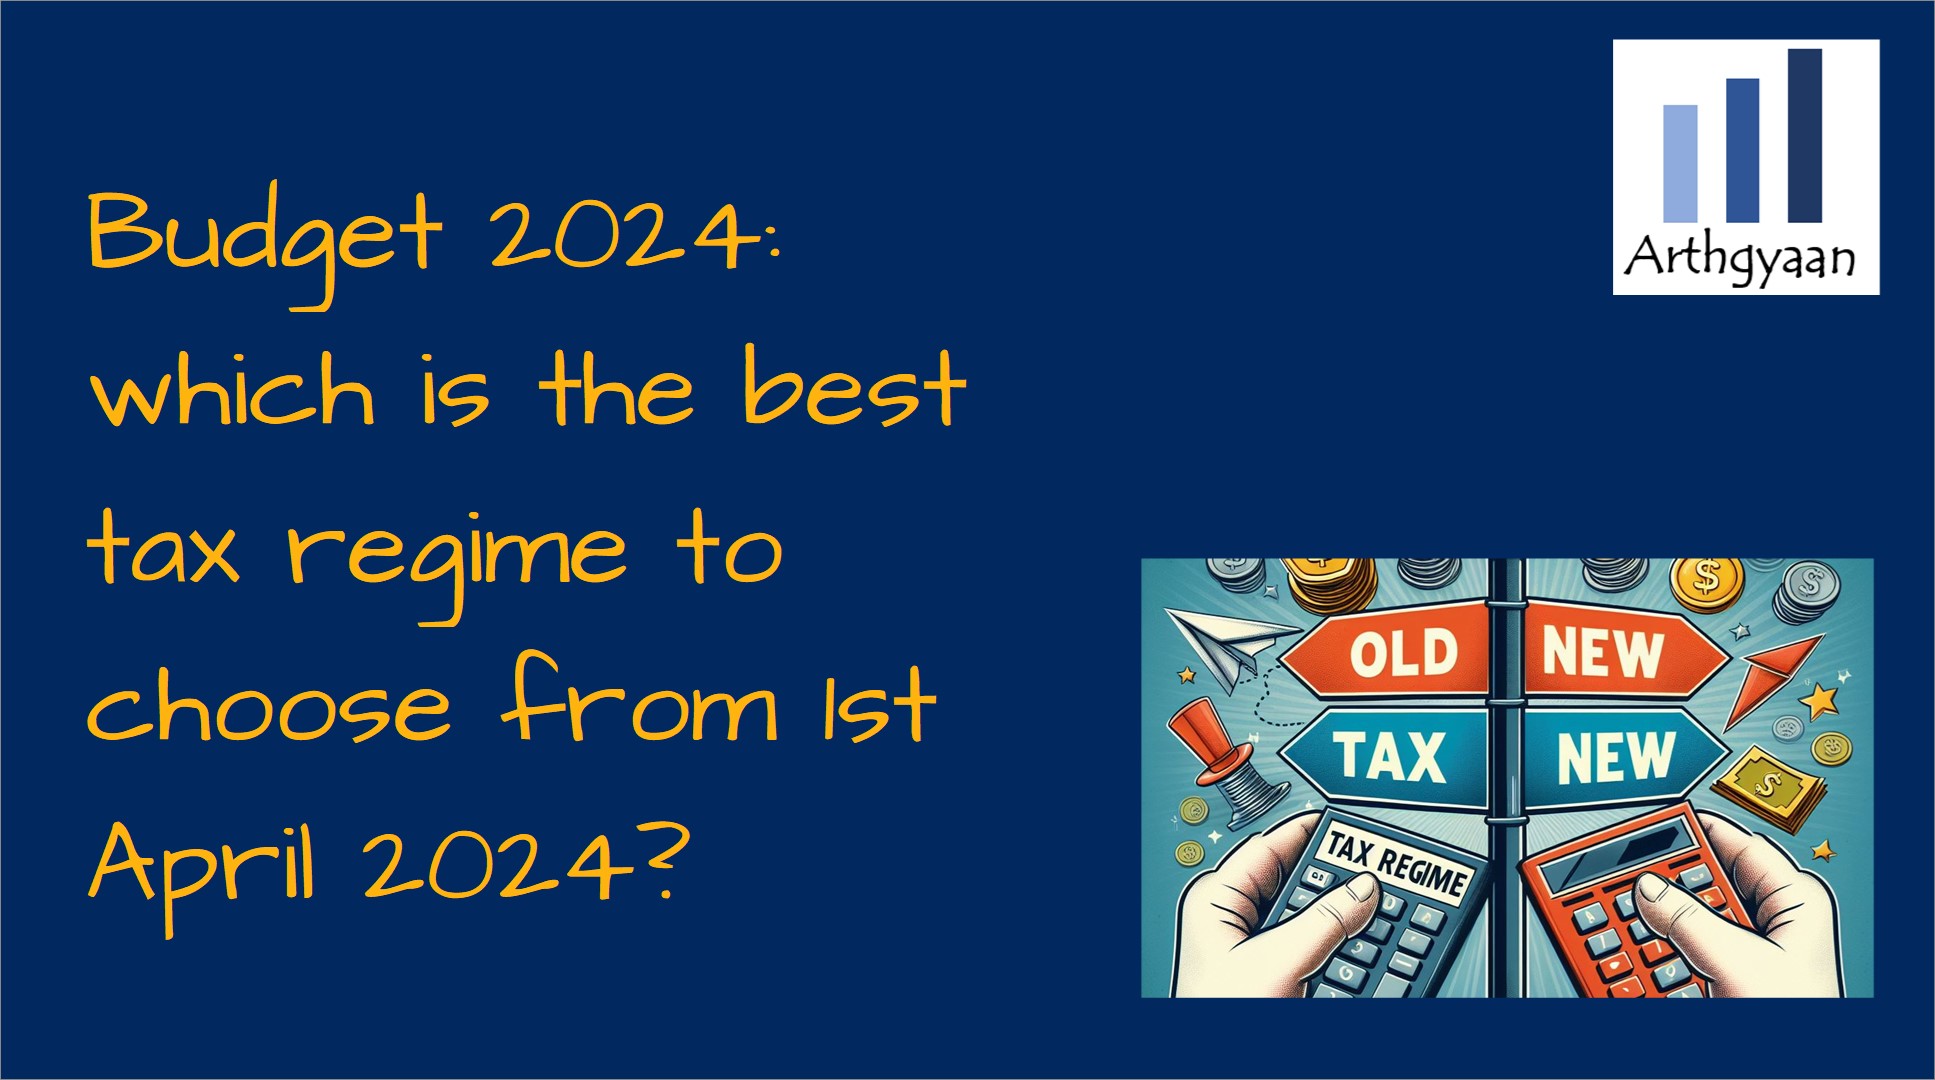 Budget 2024: which is the best tax regime to choose from 1st April 2024?